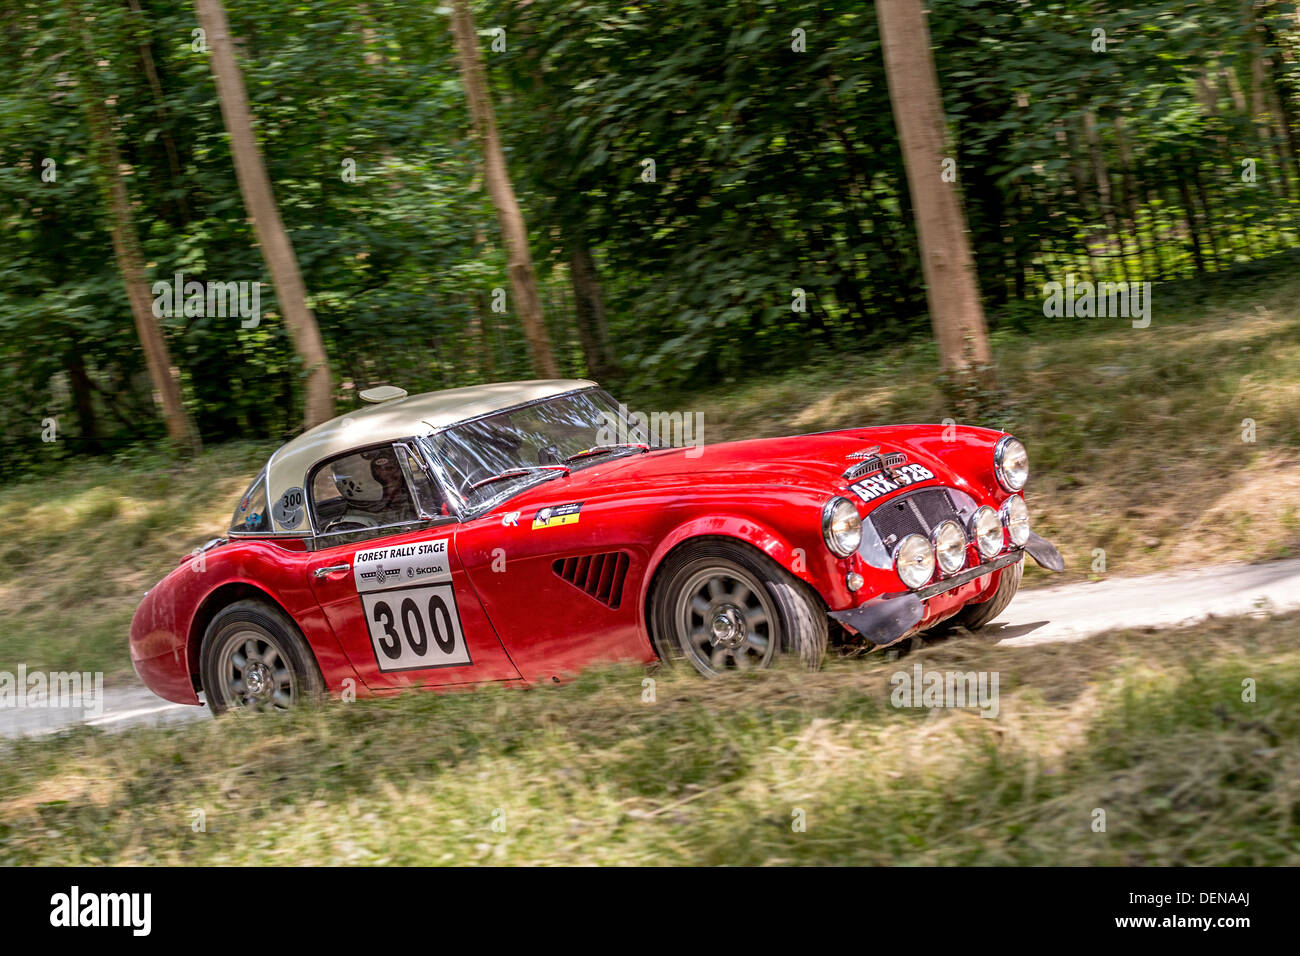 1964 Austin Healey 3000 Mk3 with driver Paul Woolmer, rally stage at the 2013 Goodwood Festival of Speed, Sussex, England, UK. Stock Photo